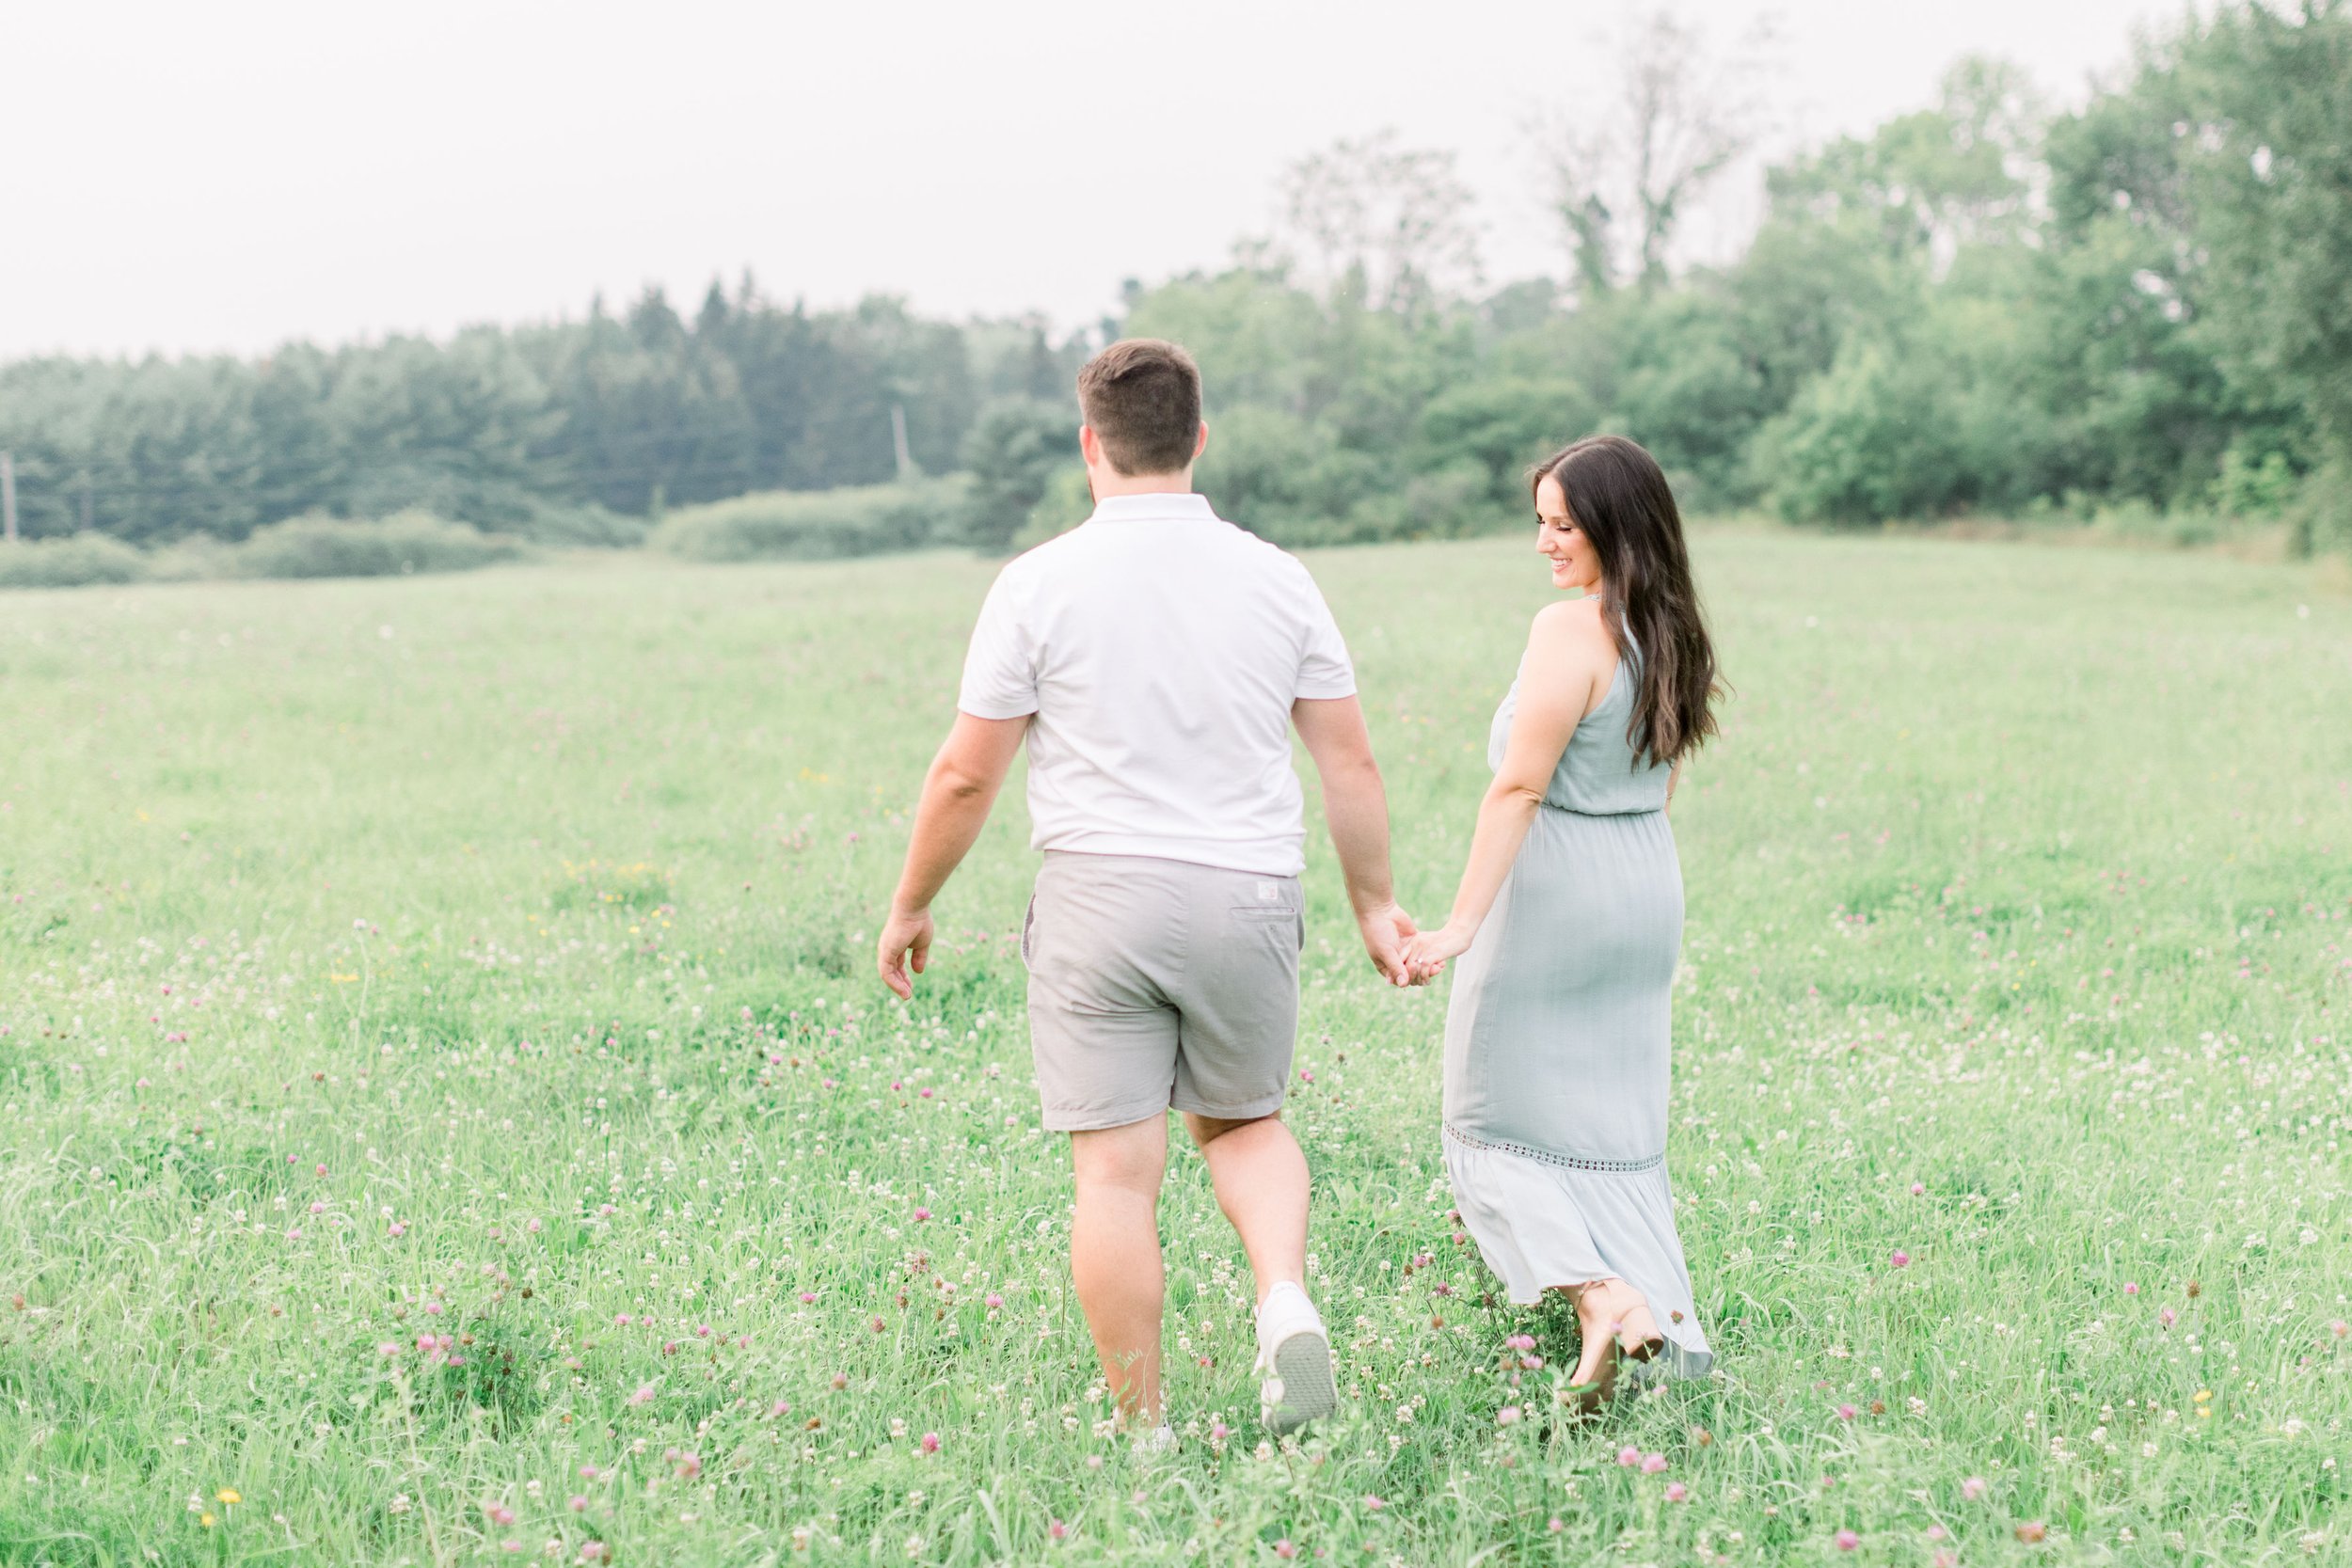  Walking in a field at Grass Creek Park engaged couple holds hands at dusk by Chelsea Mason Photography. summer engagement #Kingstonengagement #GrassCreekParkPortraits #Ontarioengagementphotographers #Chelseamasonphotography #Chelseamasonengagements 